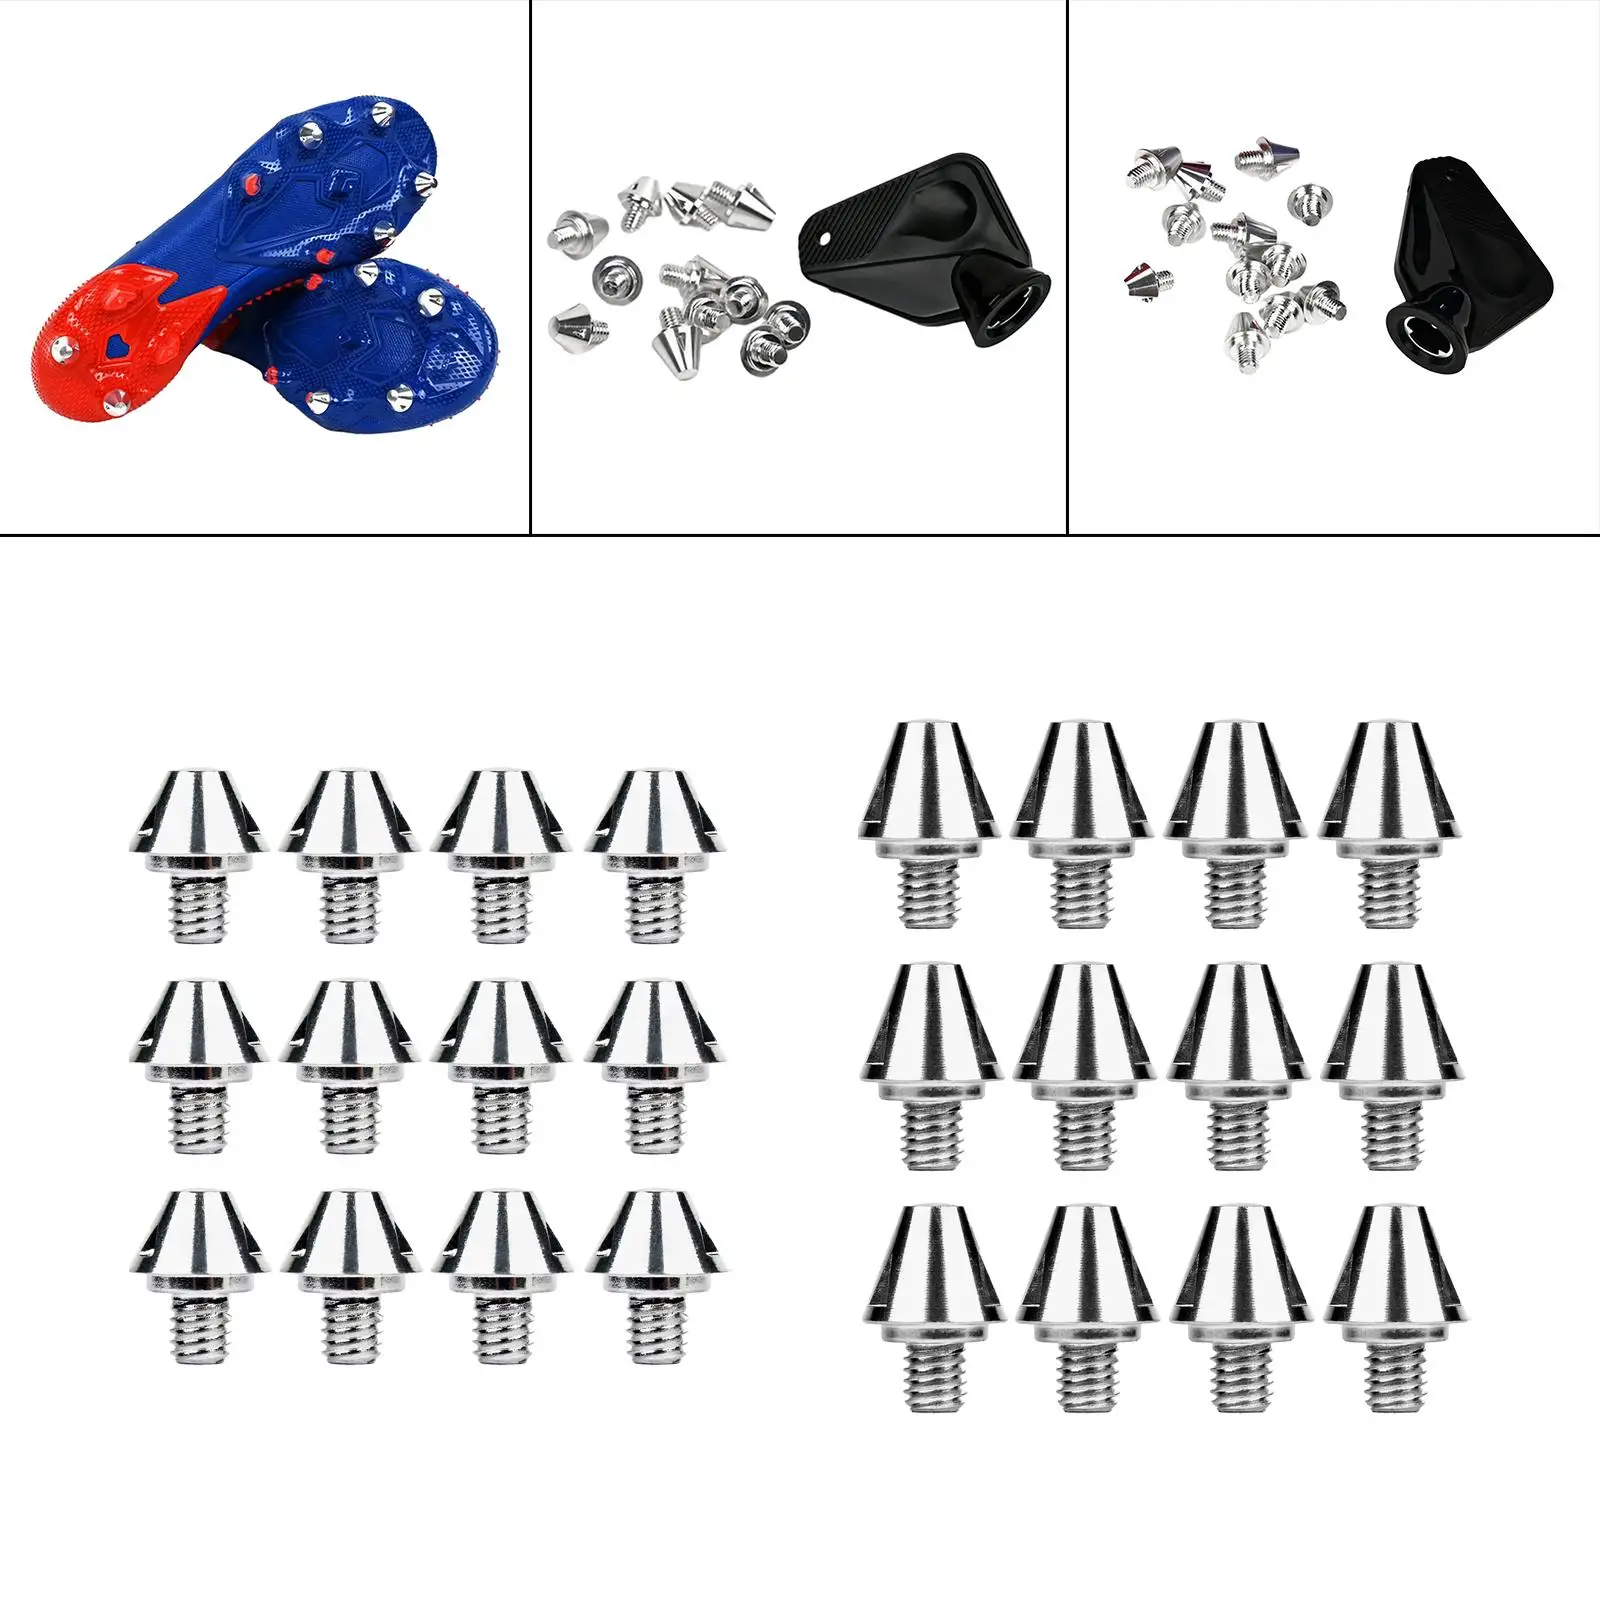 12Pcs Track Shoes Spikes Turf Anti Slip Soft Ground Portable M6 Threaded Rugby Studs for Competition Training Athletic Sneakers